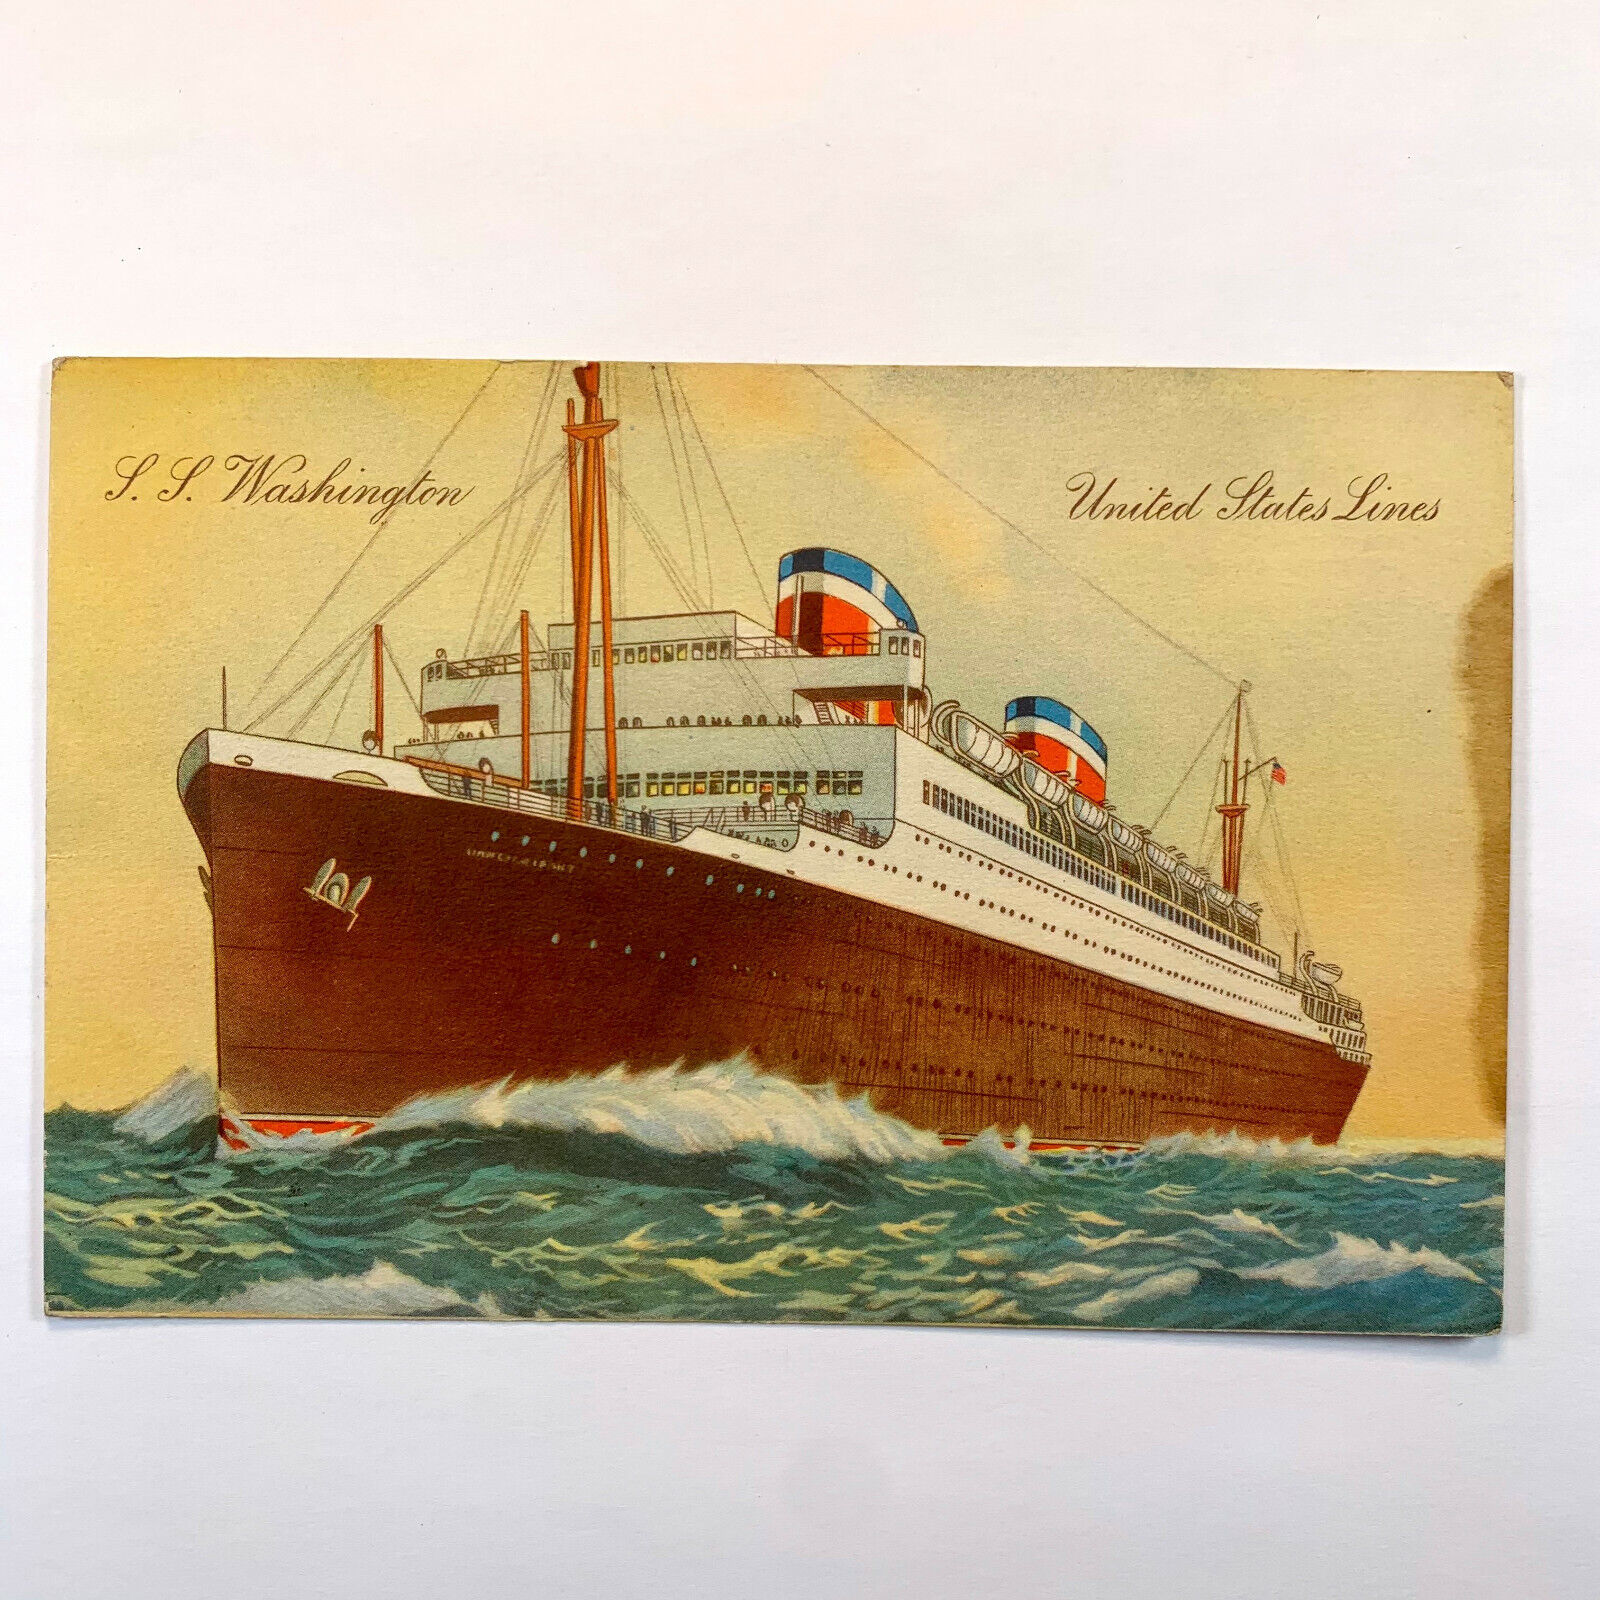 Postcard Steamer Steam Ship United State Lines S.S. Washington 1930s Unposted